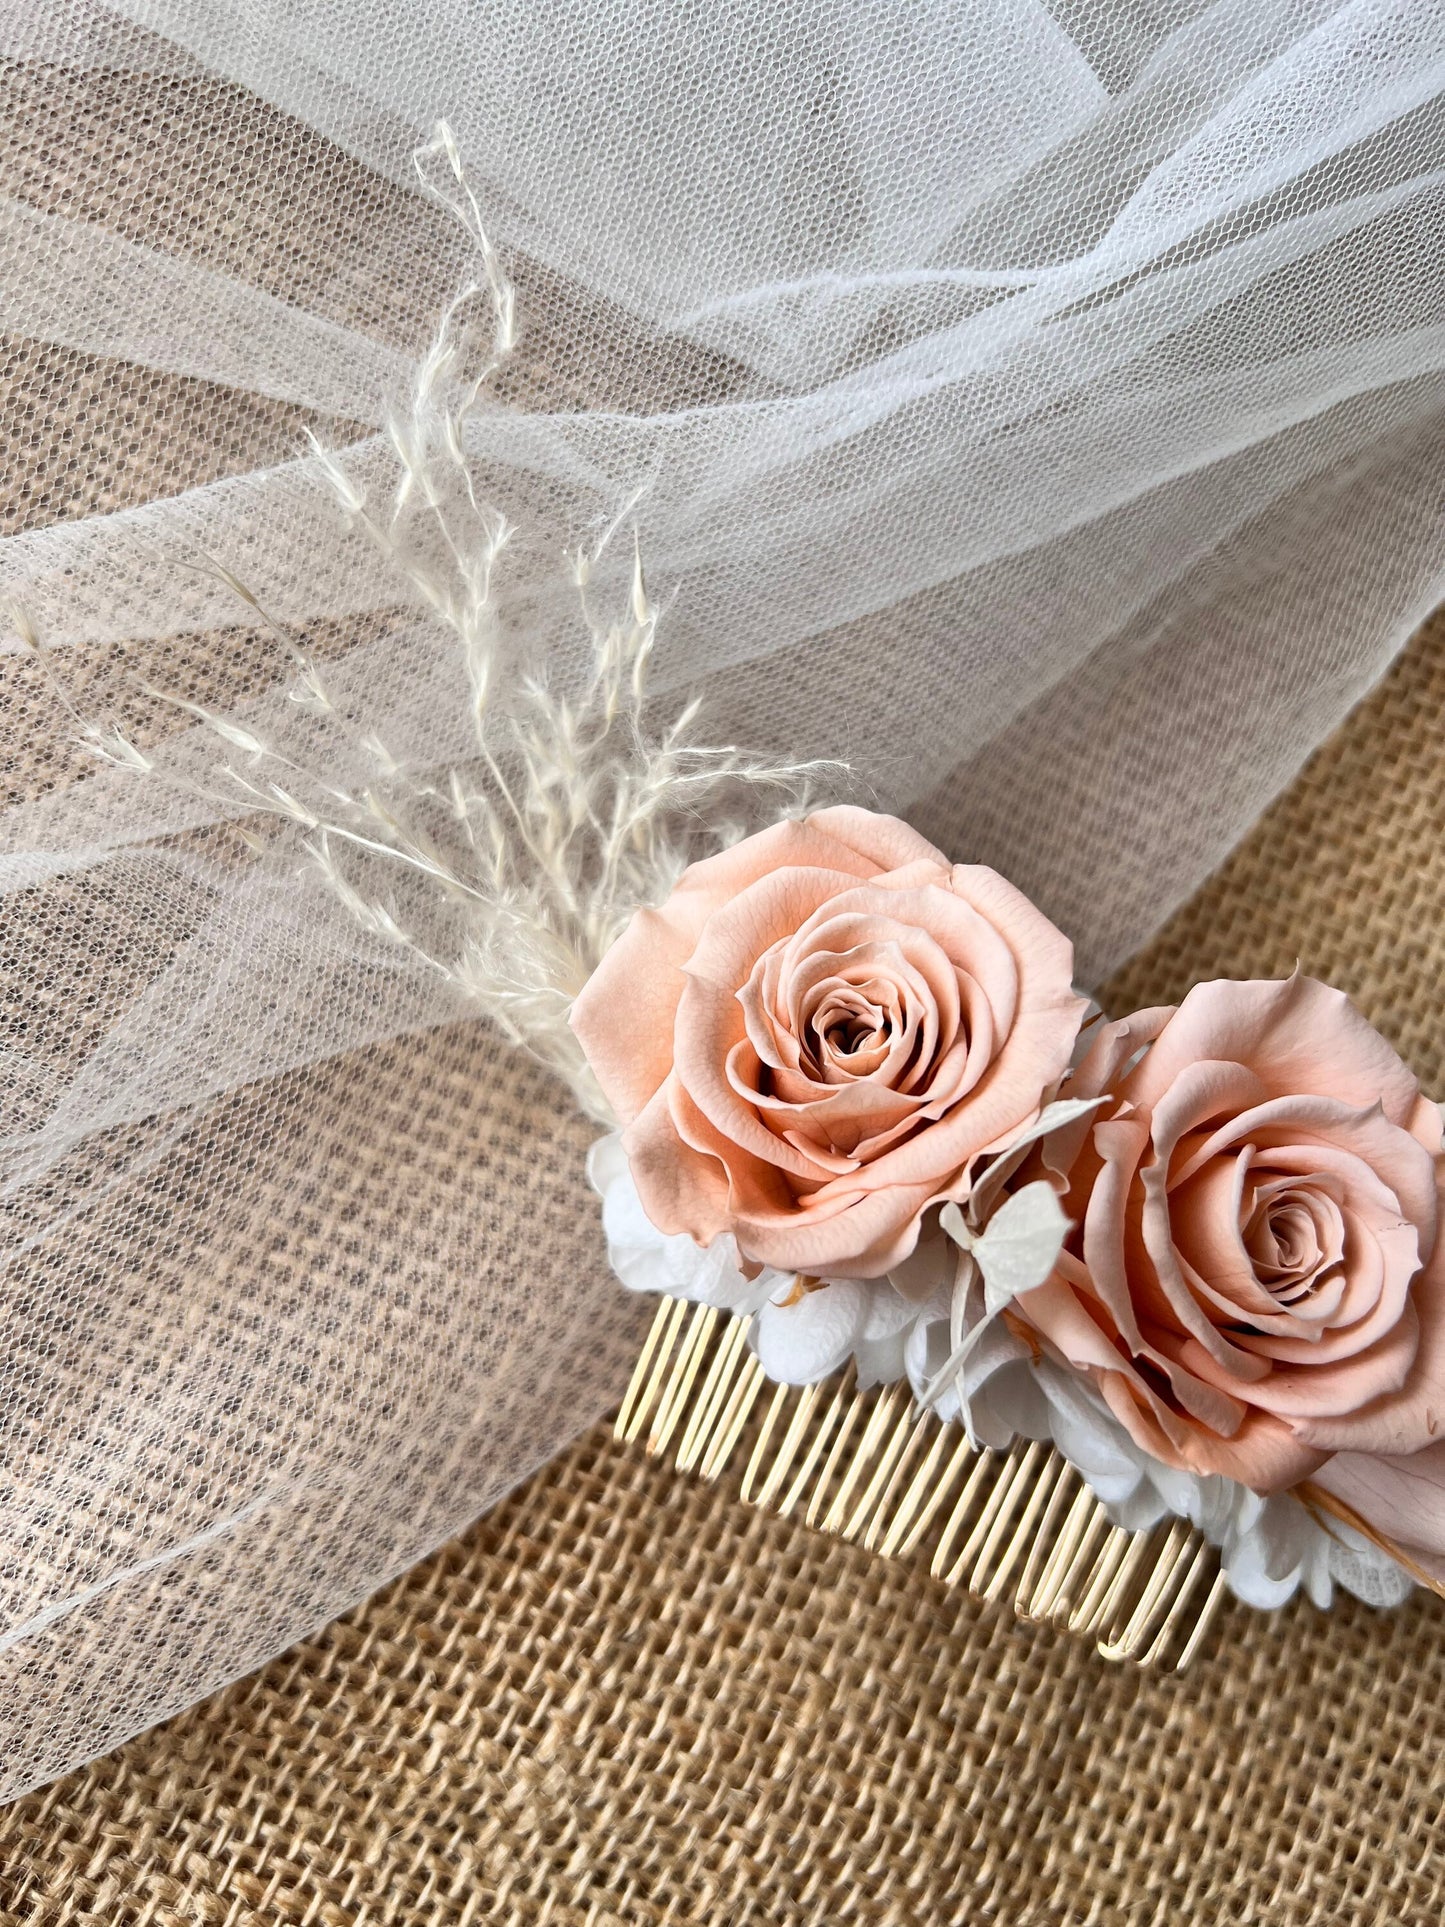 Pink Peach Rose Hair Piece, Princess Bridal Hair Piece, Preserved Rose Decorative Wedding Side Comb in Gold, Everlasting Flower Updo Hair